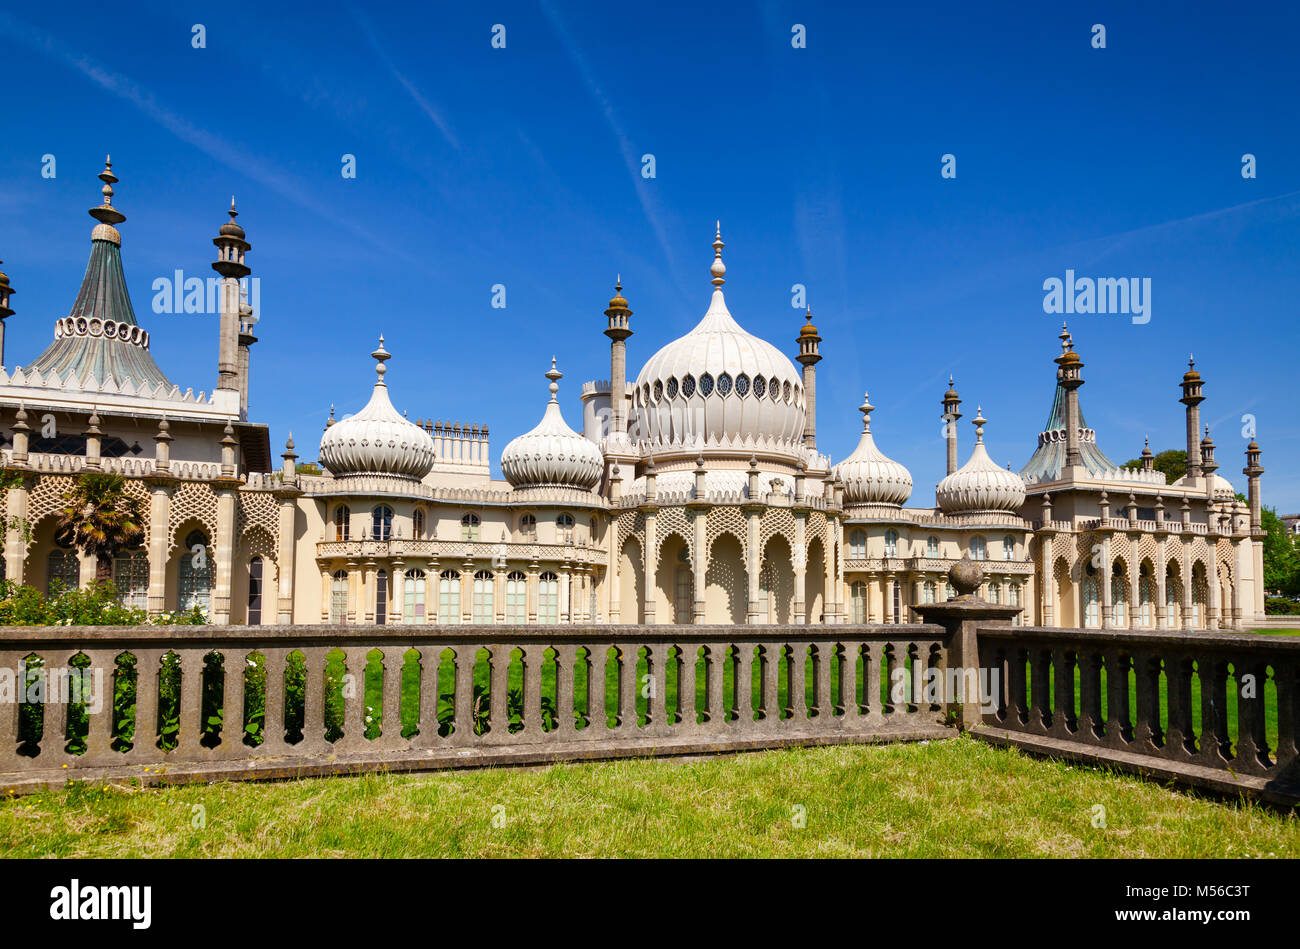 The Royal Pavilion (Brighton Pavilion), former royal residence built in the Indo-Saracenic style in Brighton, East Sussex, Southern England, UK Stock Photo